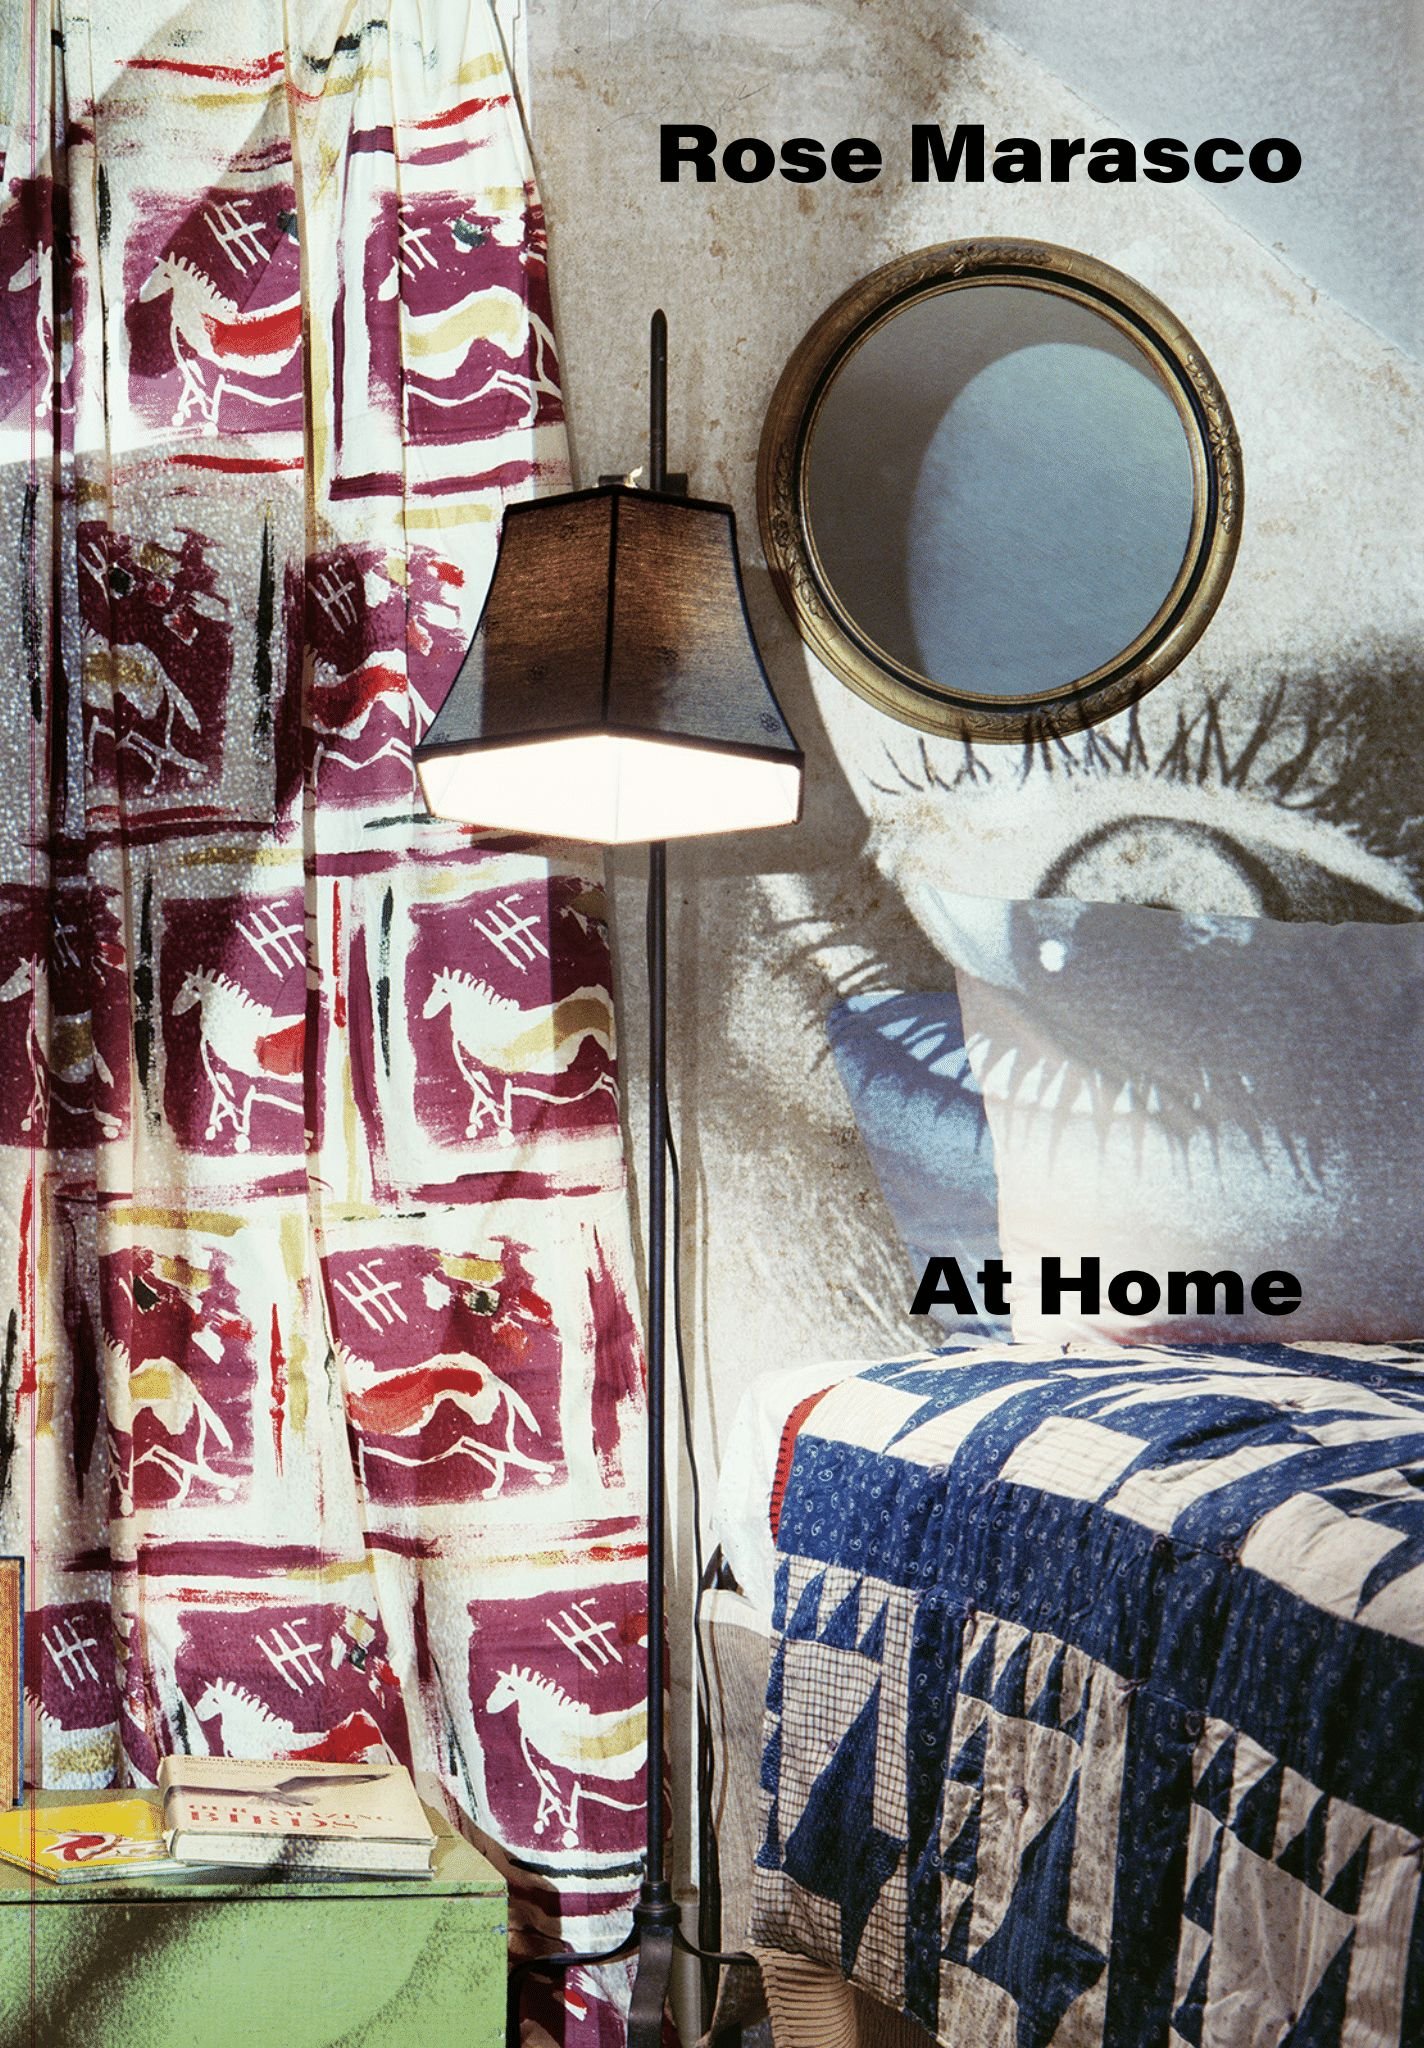 At Home: A Reading by Rose Marasco